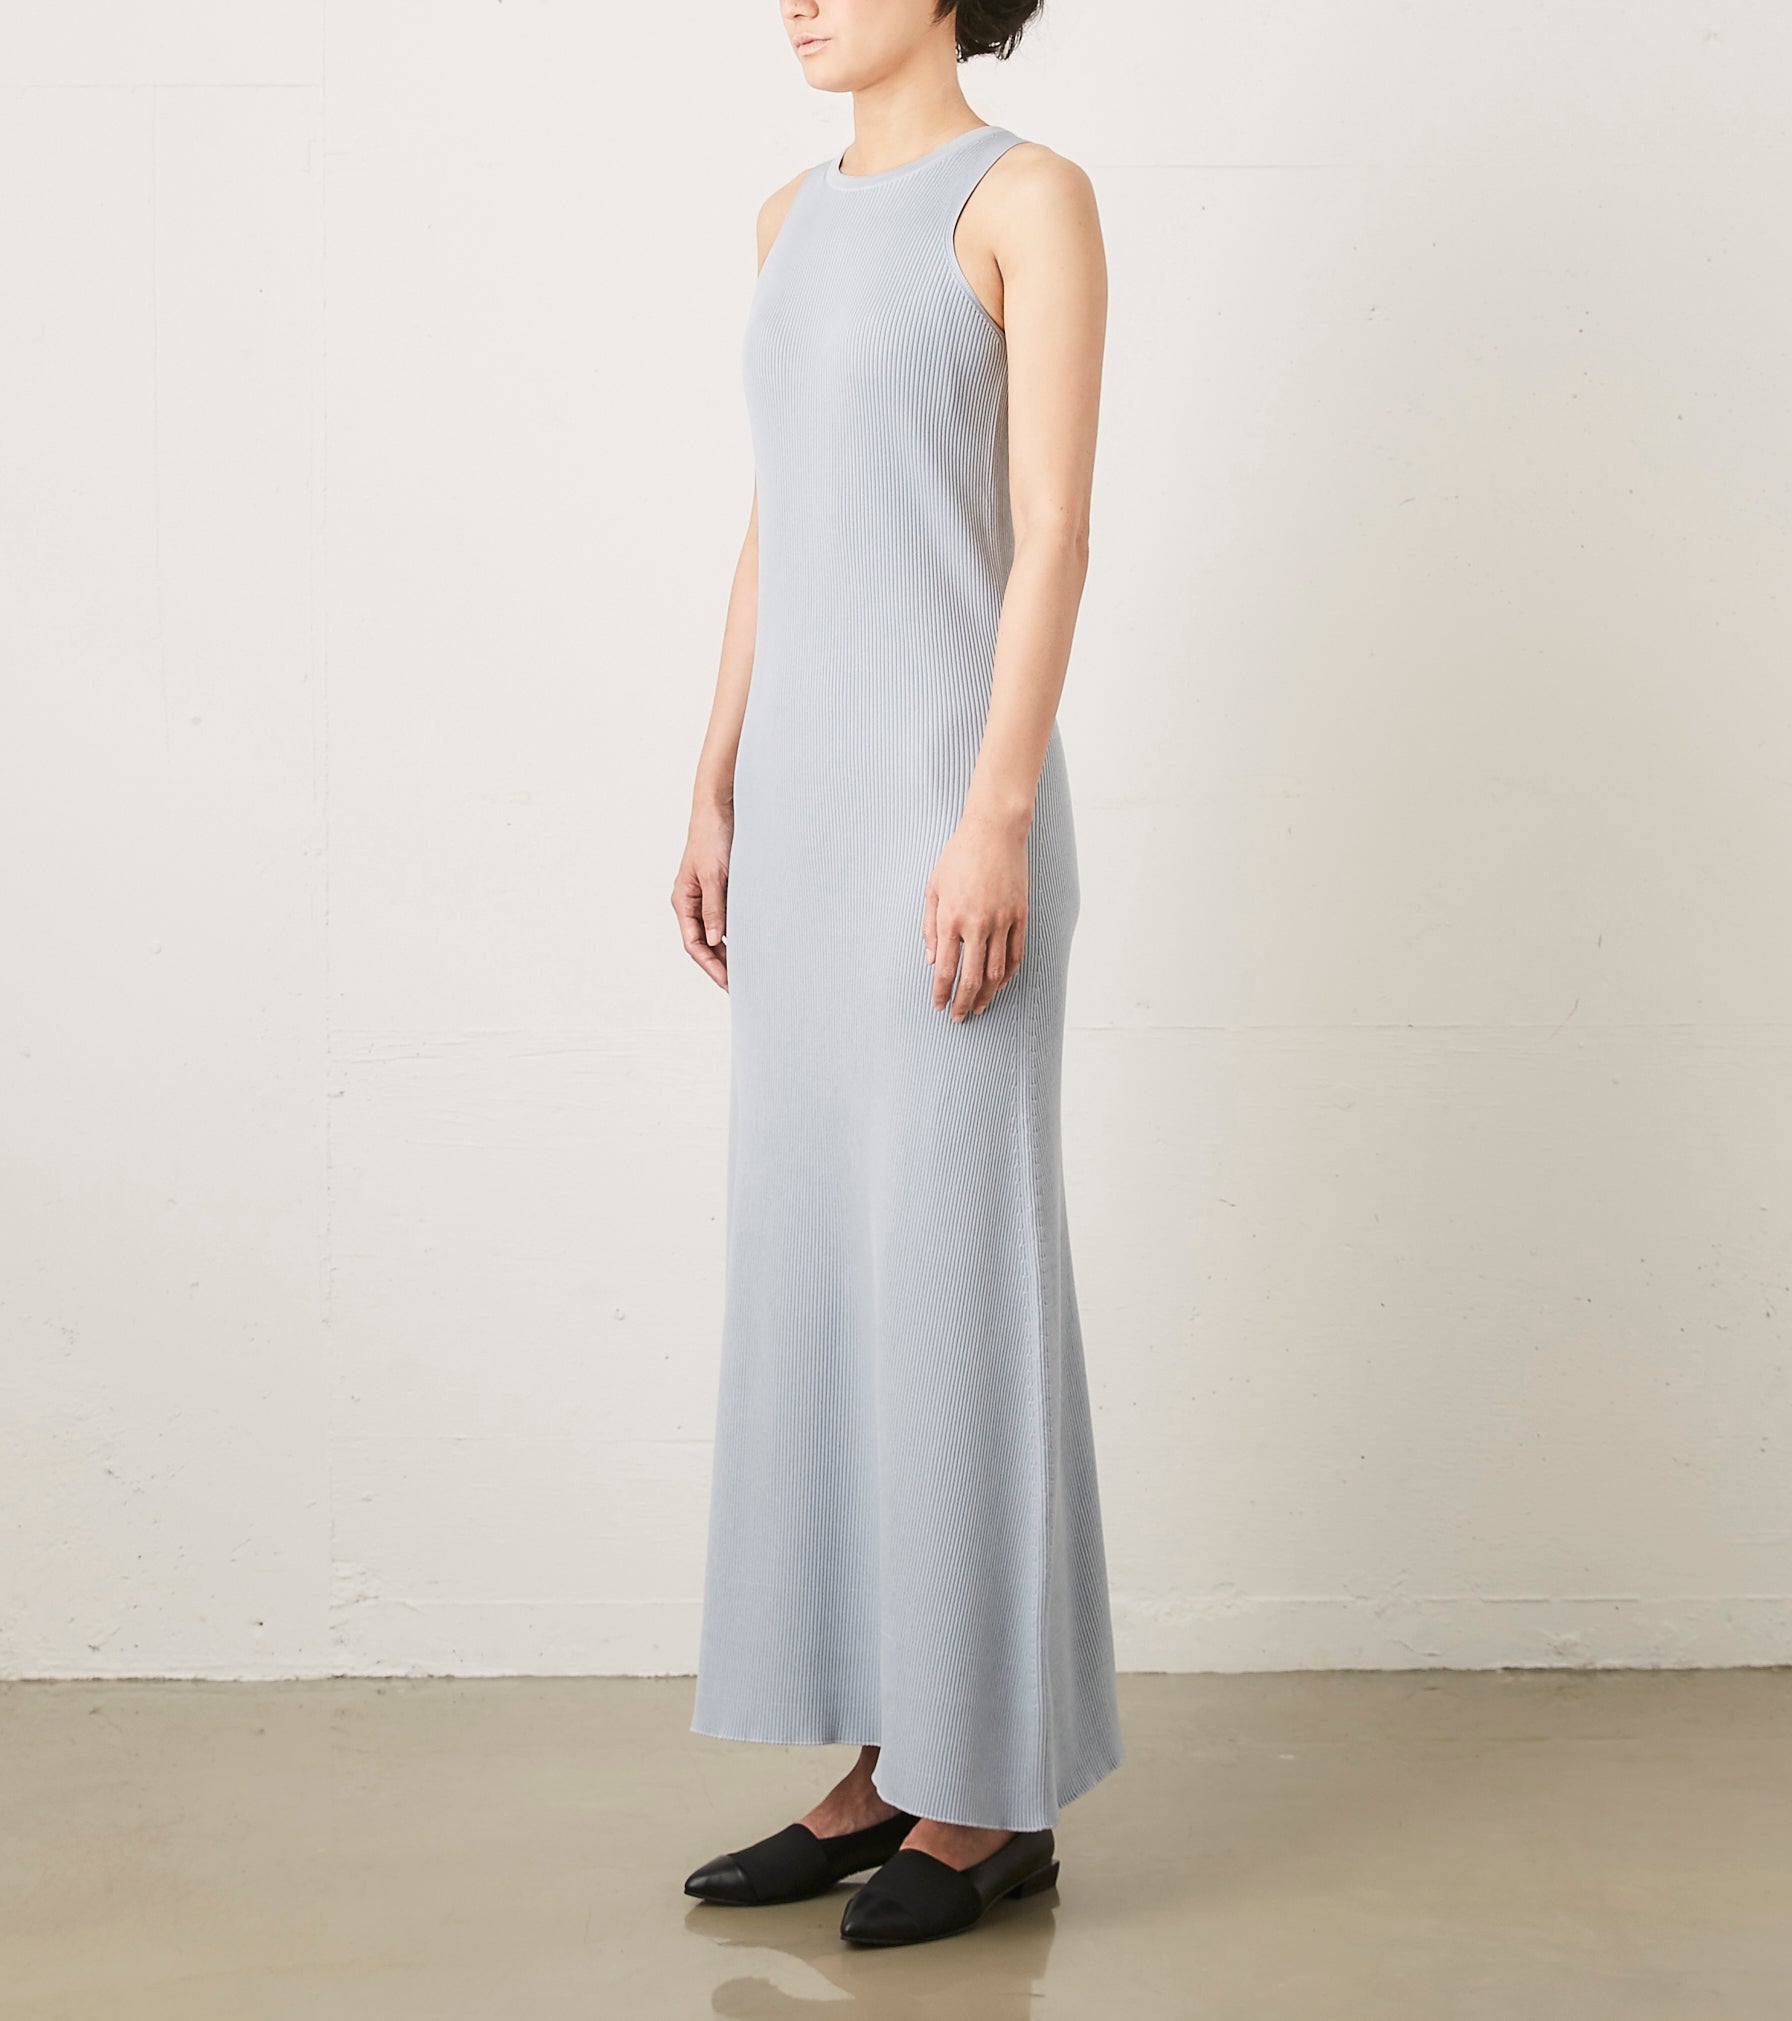 A Very Minimalistic Dress – CFCL Official Online Store